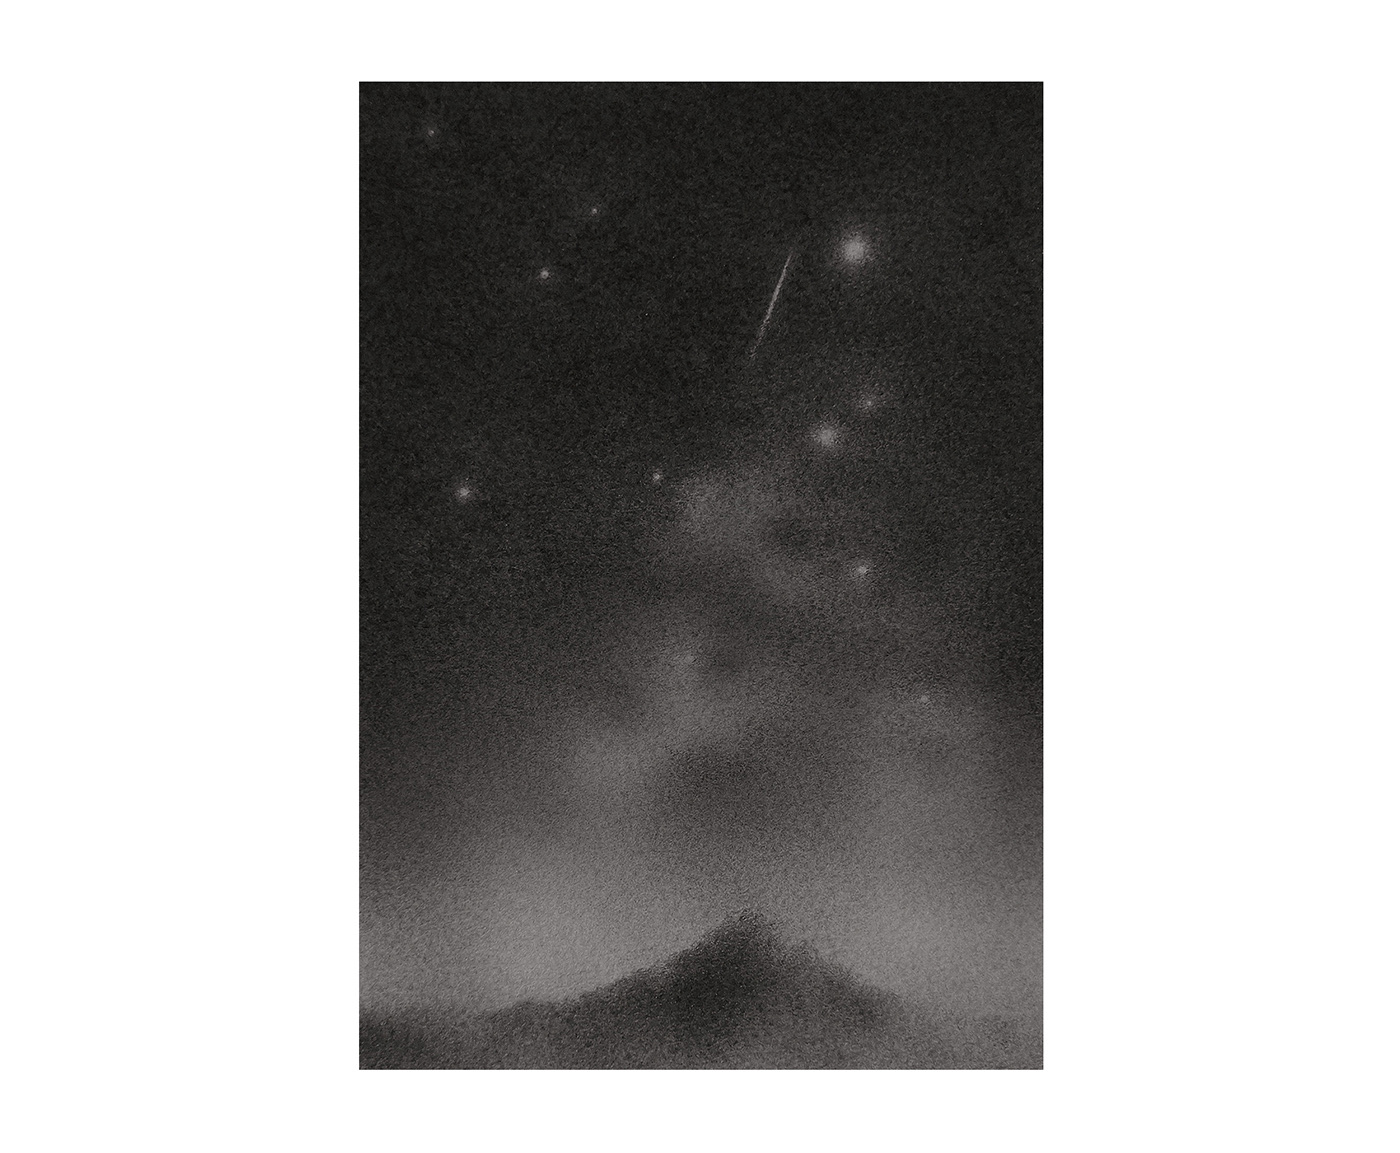 drawings bw blackandwhite Space  astronomy stars universe Nature pencil graphite